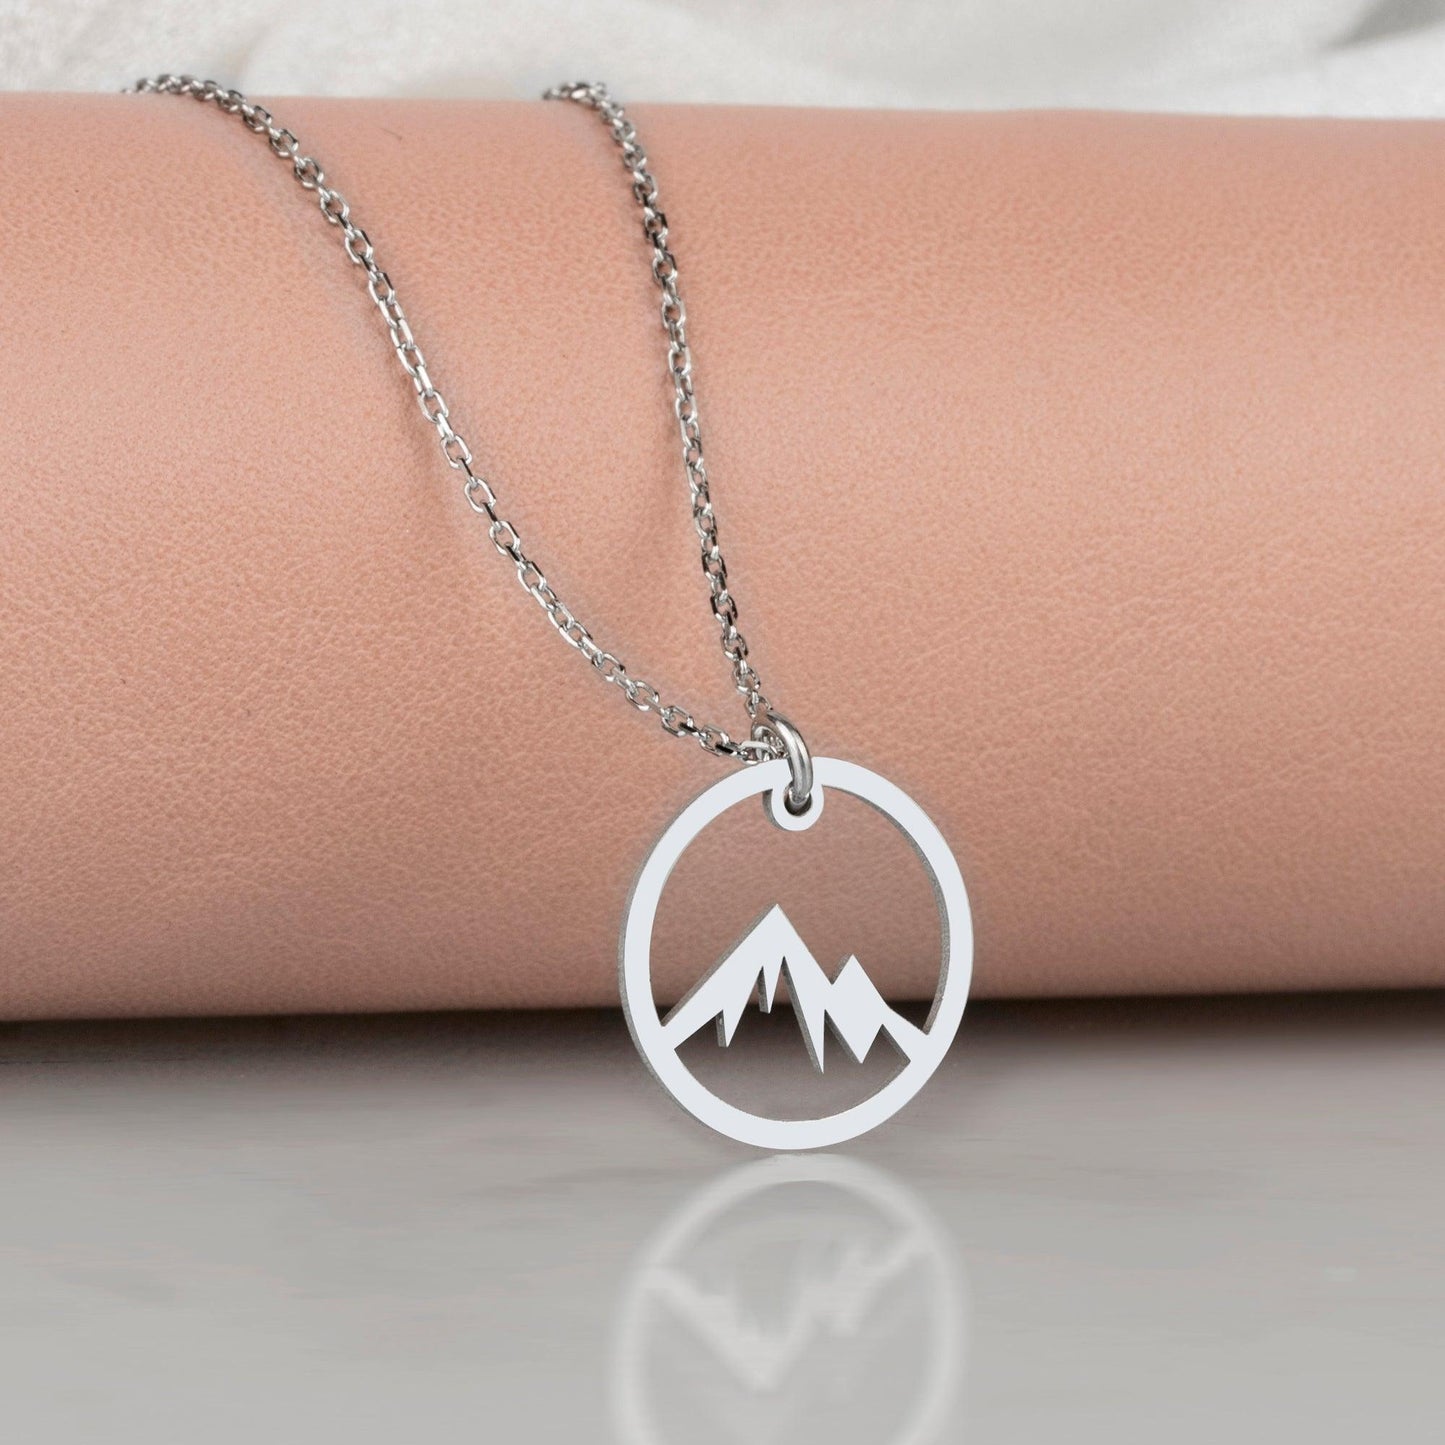 Mountain Necklace, Silver Mountain, Adventure Time, Wanderlust Necklace,Dainty Simple Necklace.